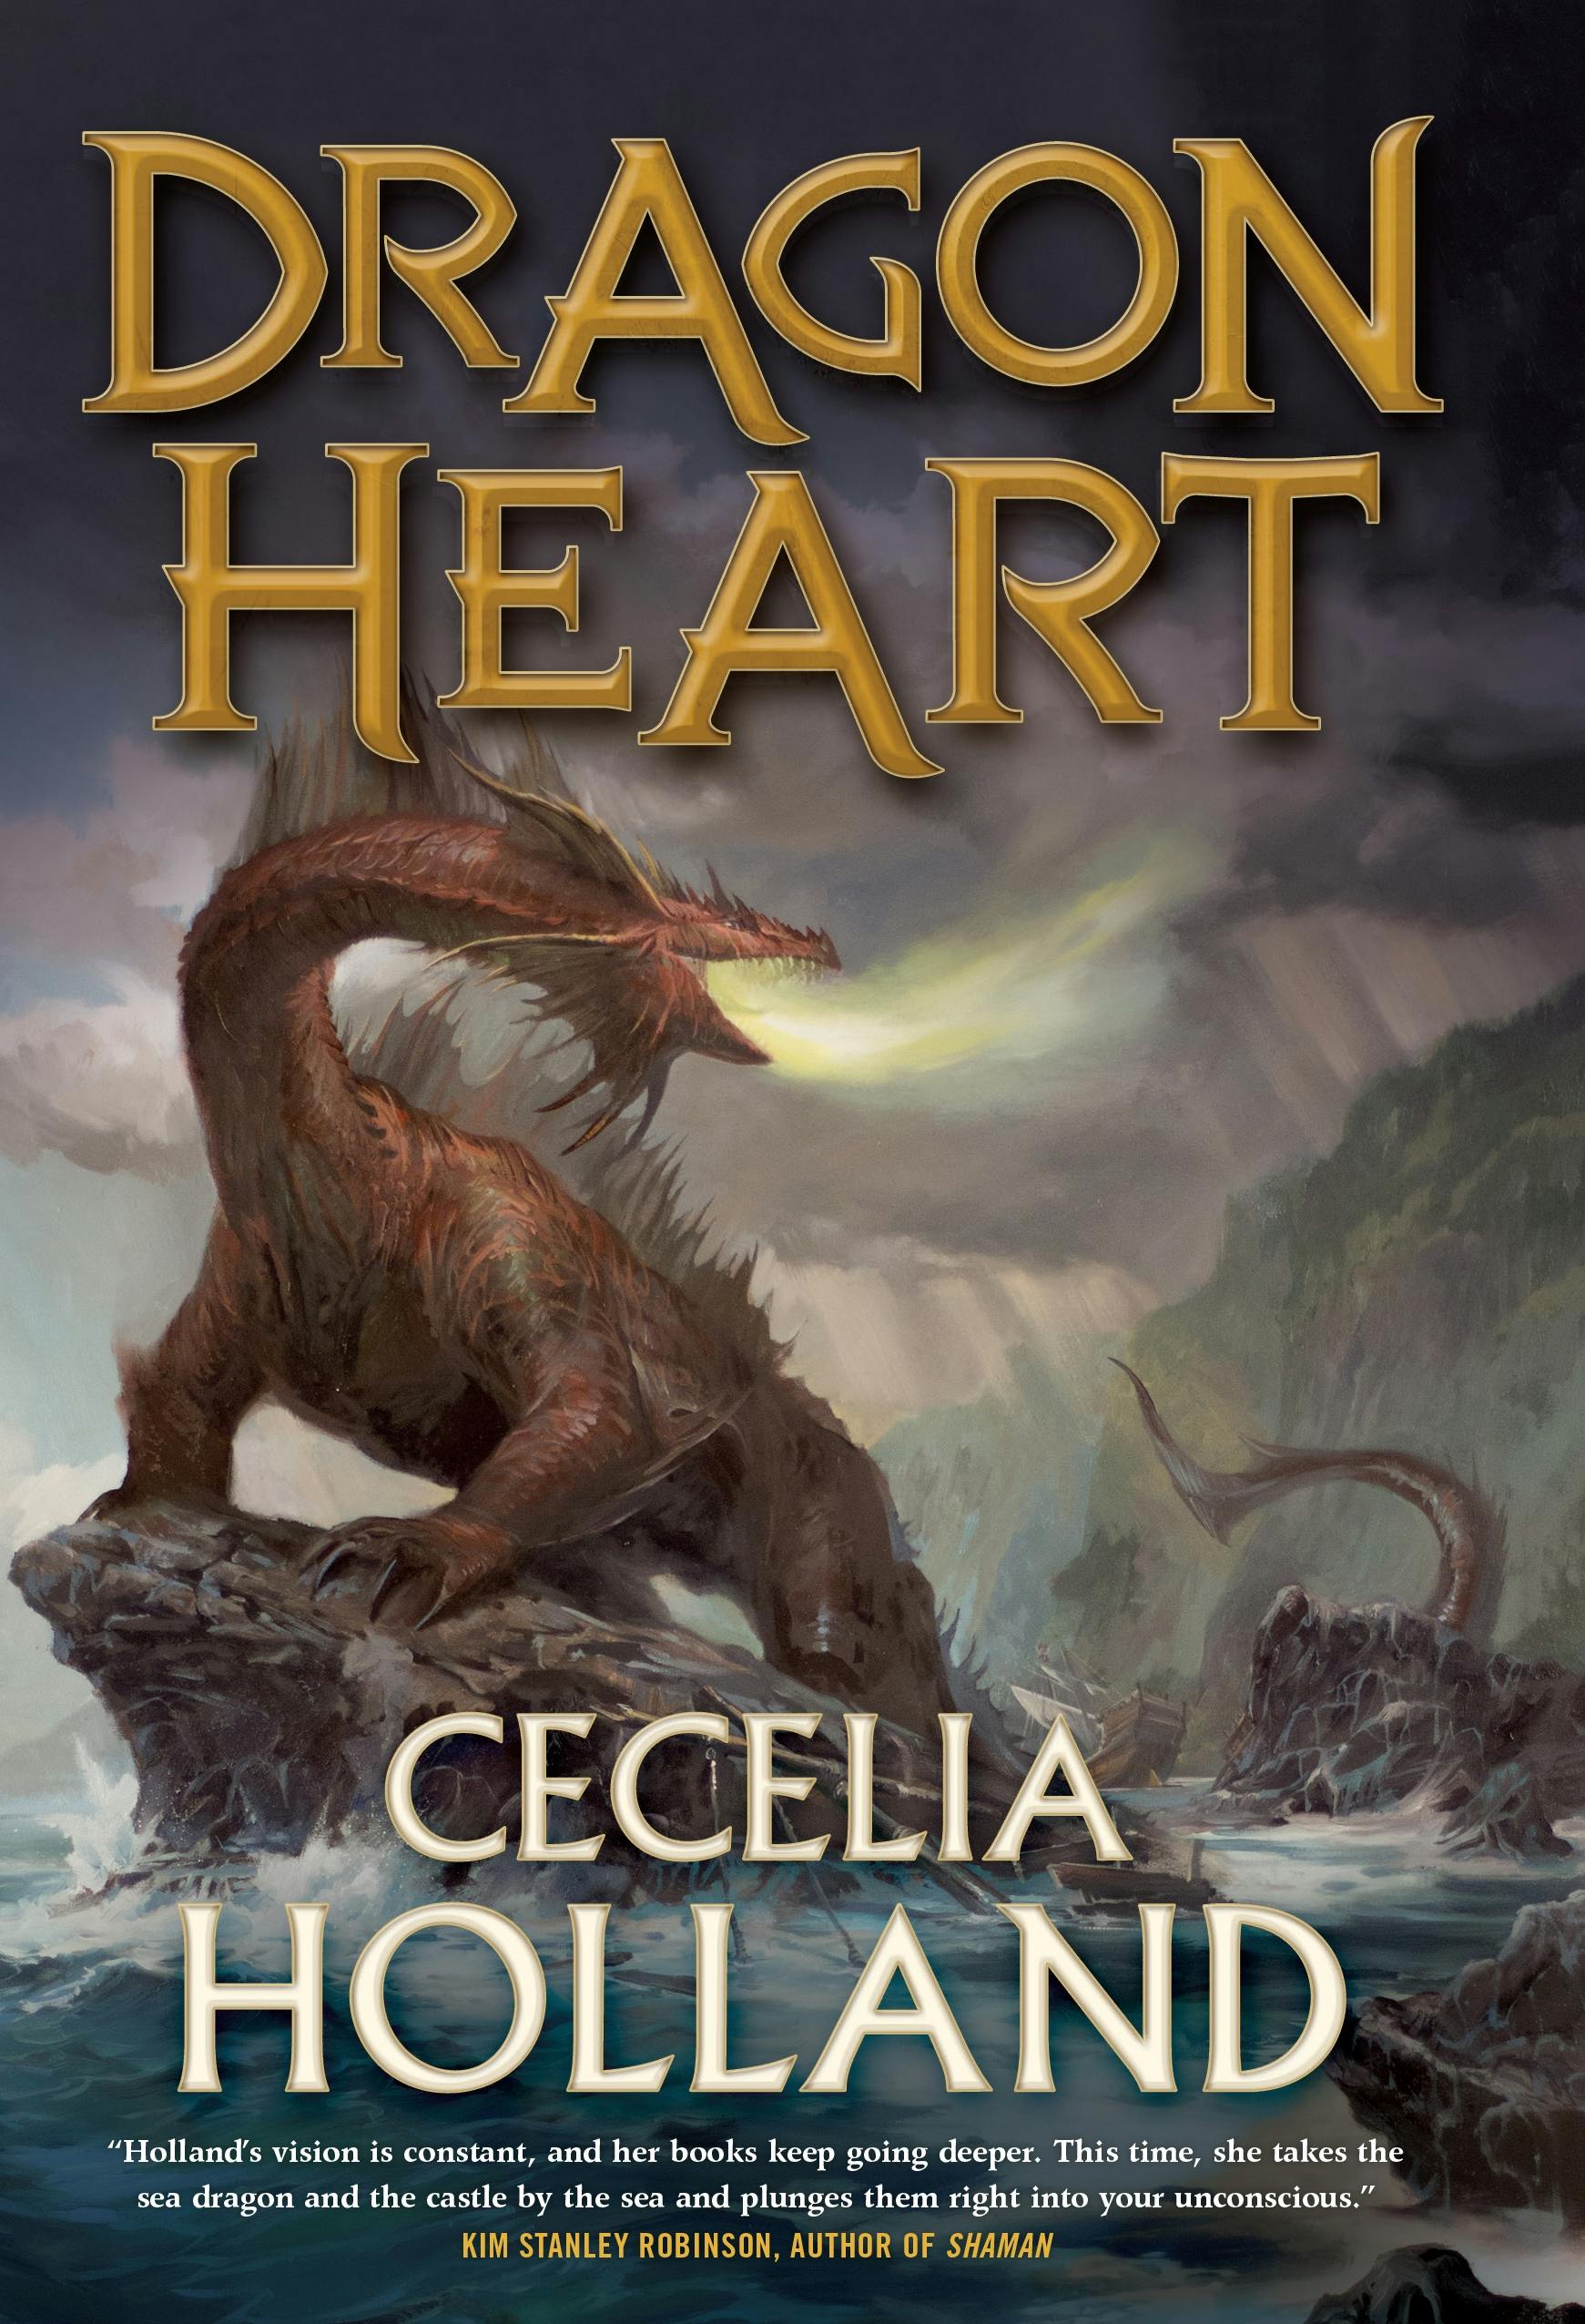 Cover for the book titled as: Dragon Heart